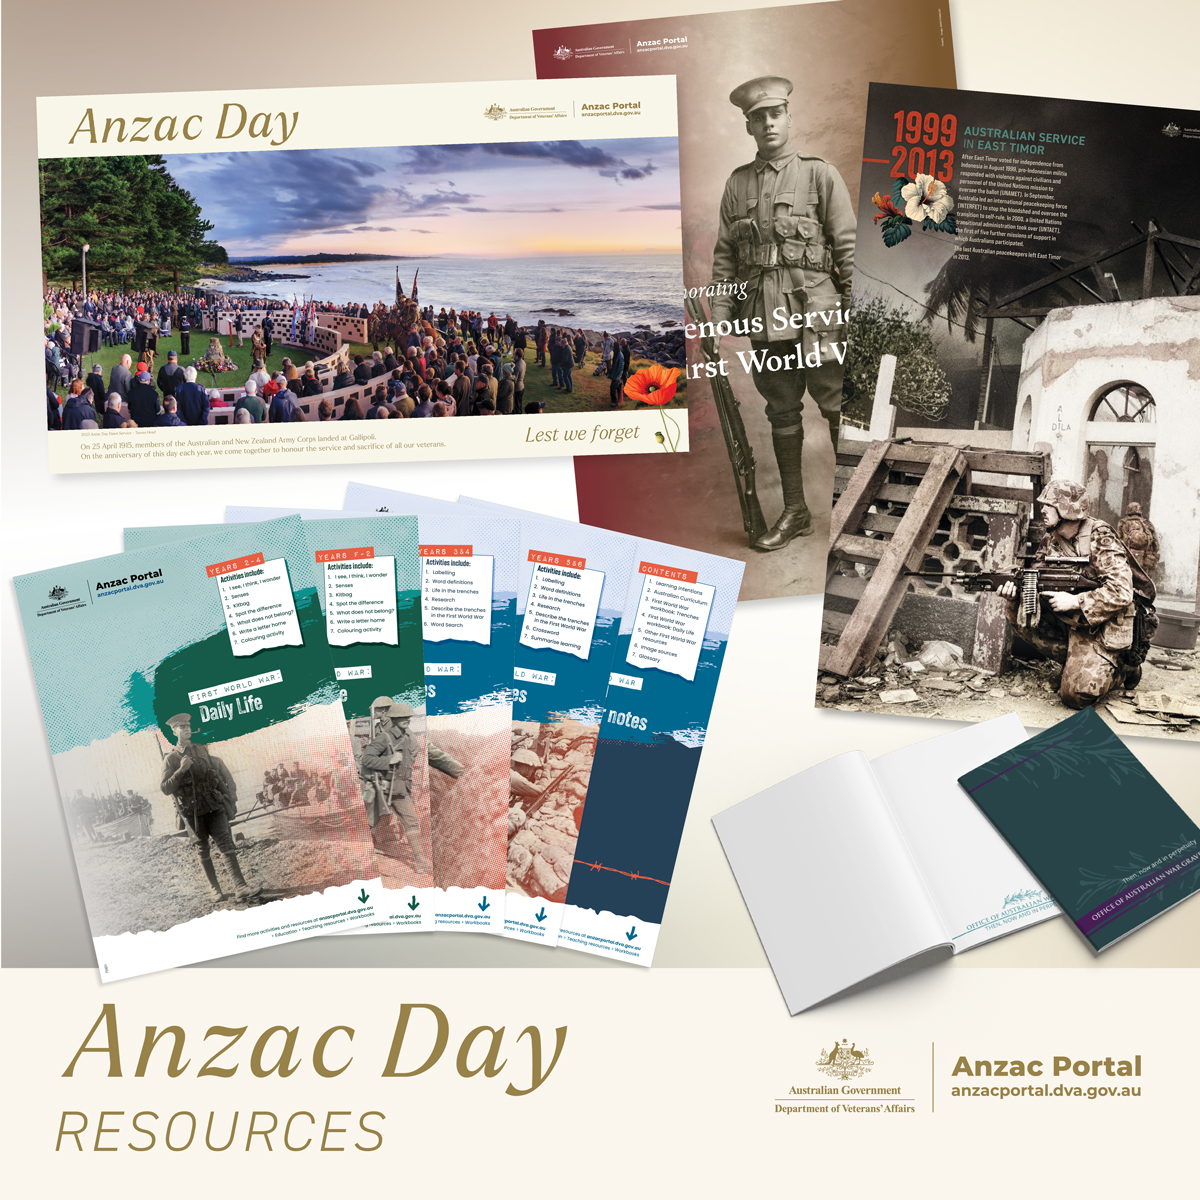 As #AnzacDay approaches, it's vital its traditions and stories live on. Our Anzac Day Kitbag can help younger generations gain an understanding and appreciation of the significance of Anzac Day. These school holidays, explore the Anzac Day Kitbag – anzacportal.dva.gov.au/resources/anza…